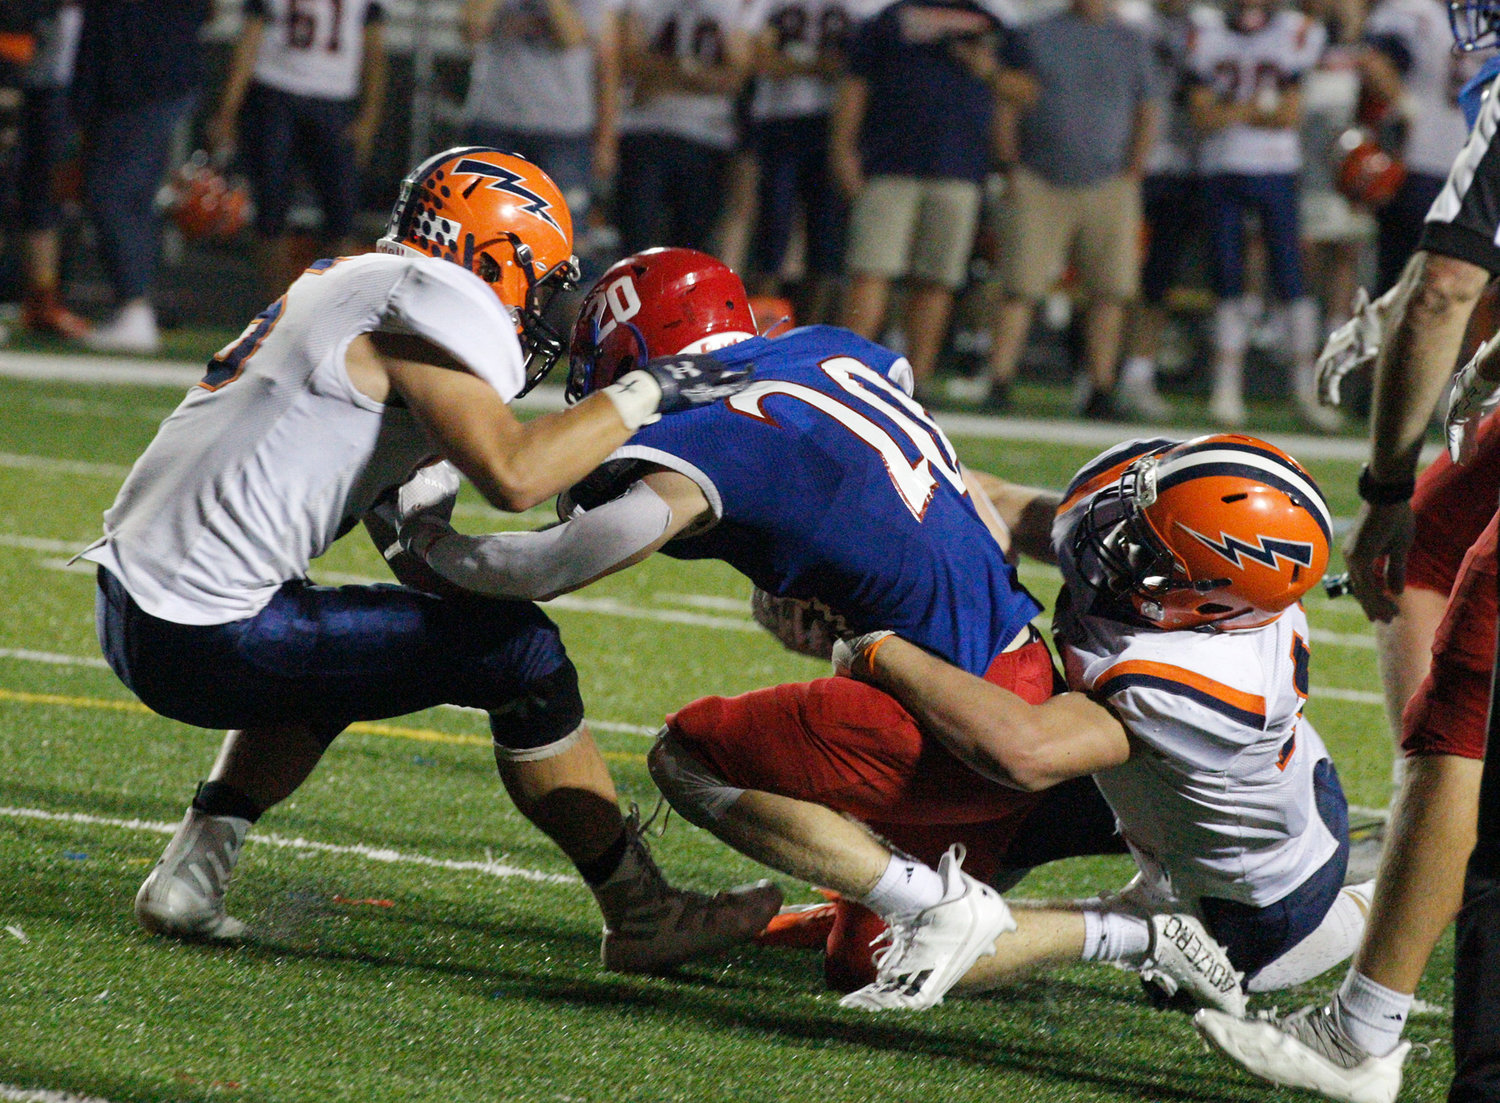 Thomas Laffoon and Austin Sulc combine for the tackle for the Chargers during their 35-8 loss to Western Boone.